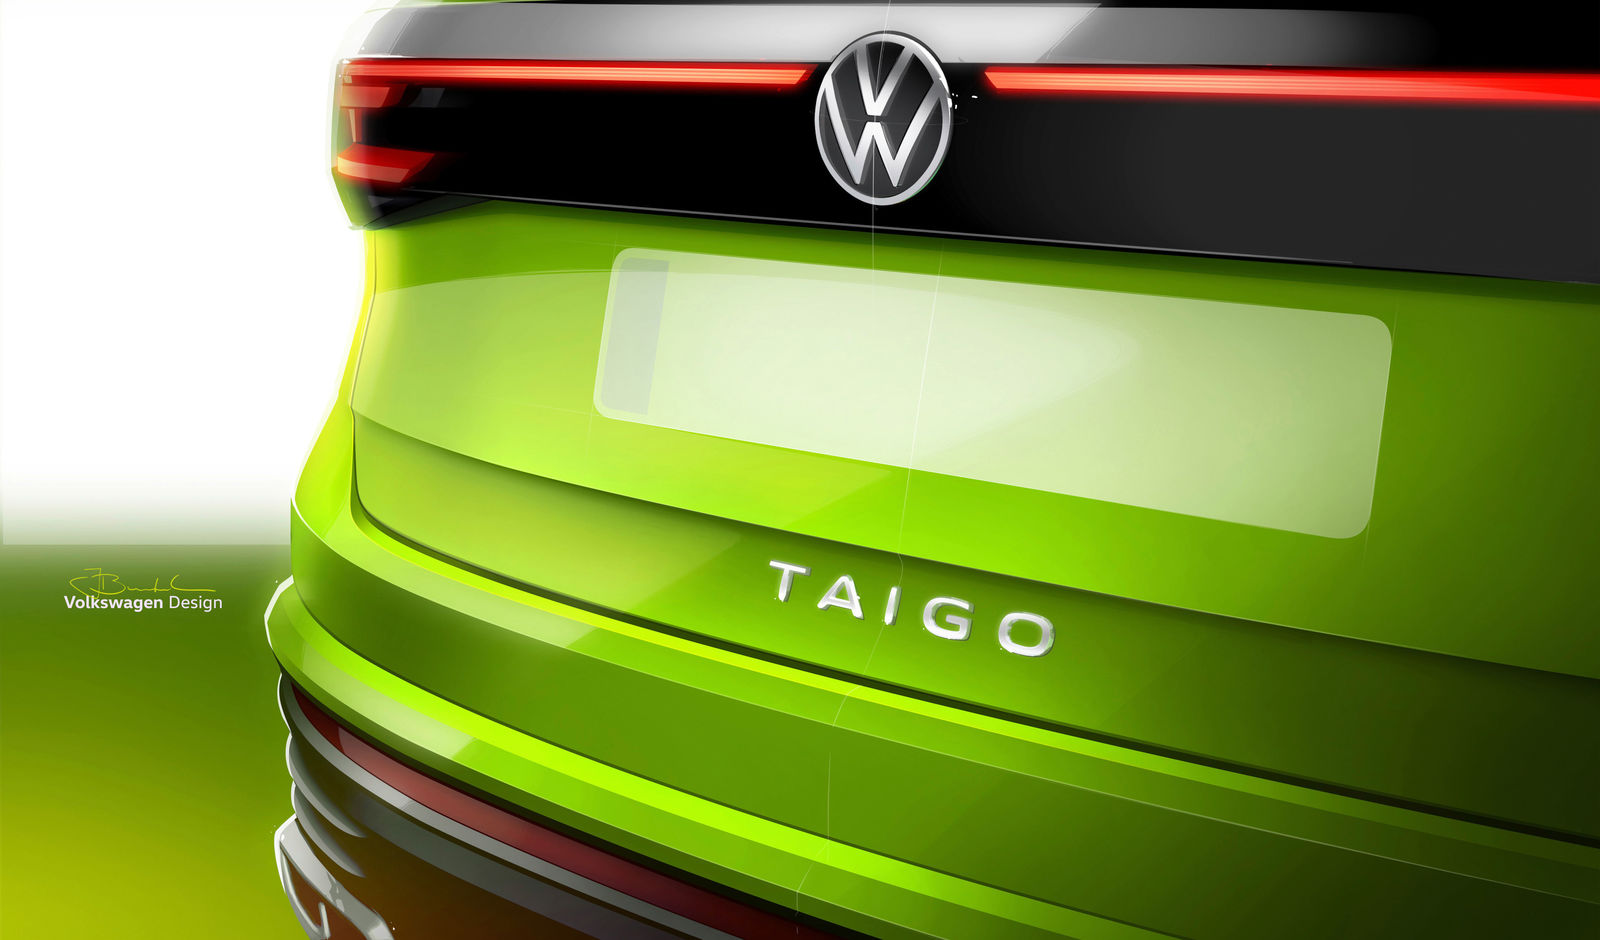 New arrival at Volkswagen: the Taigo is on its way!